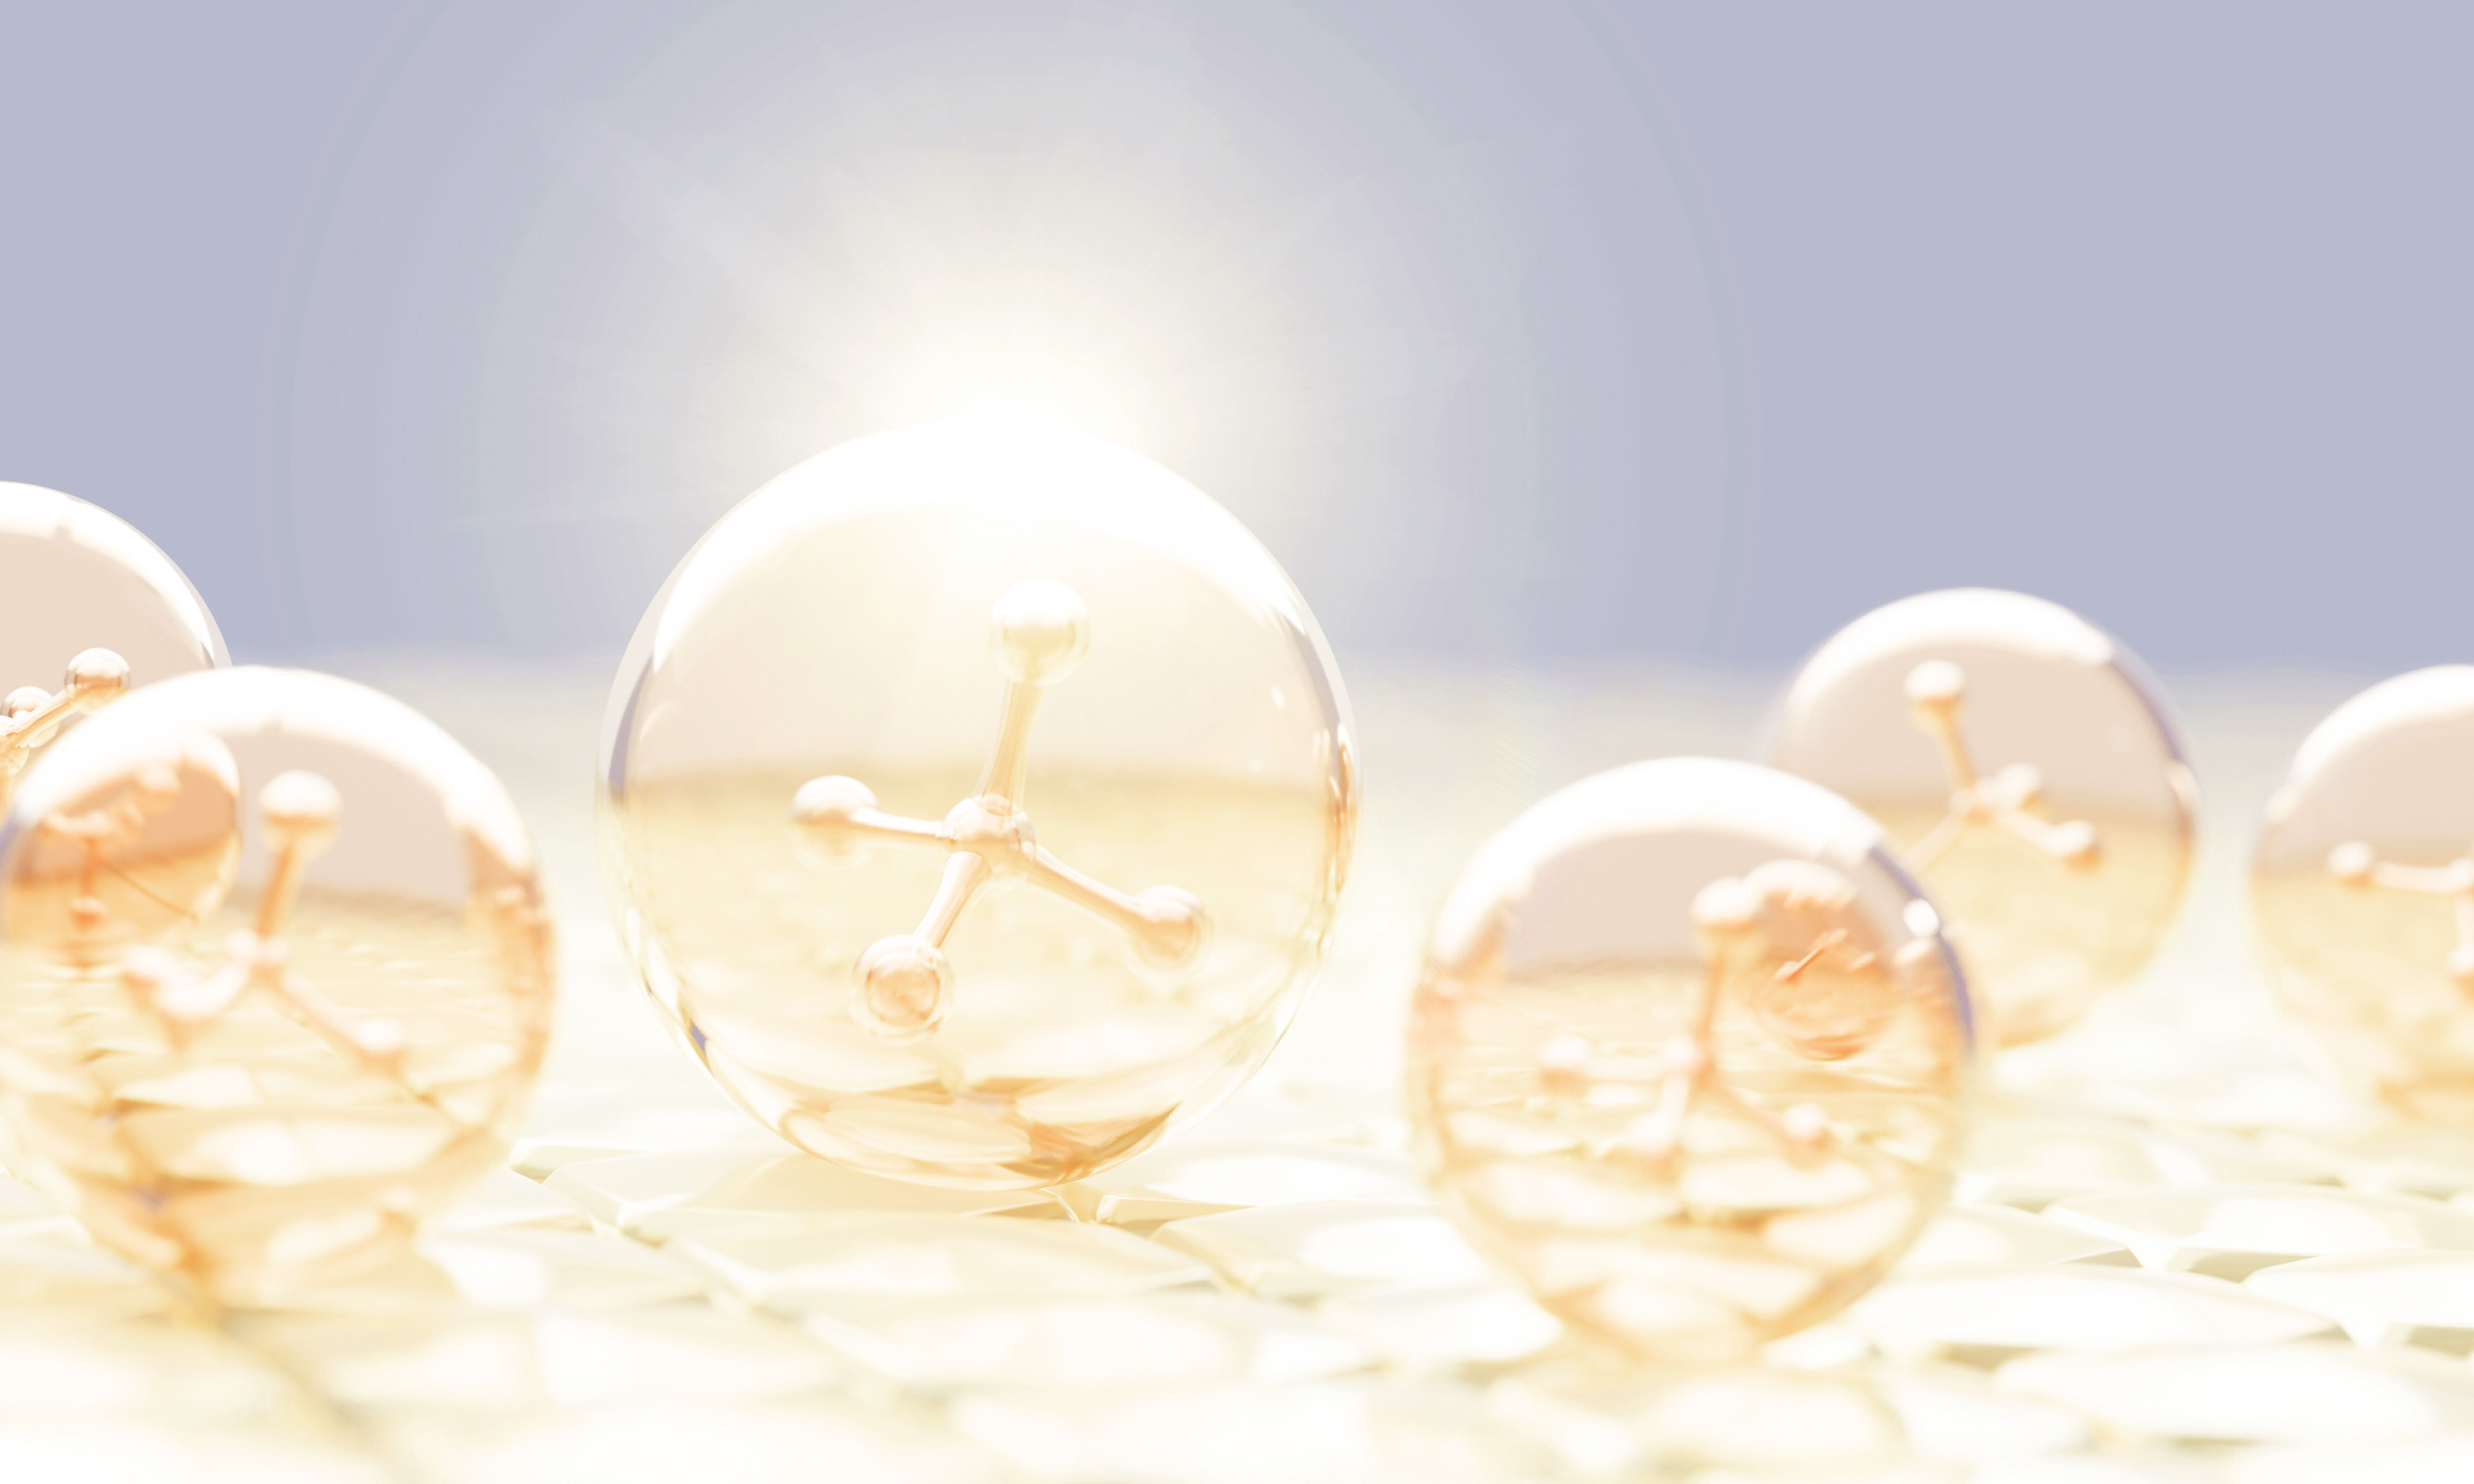 Yellow translucent glass ball objects from Shutterstock